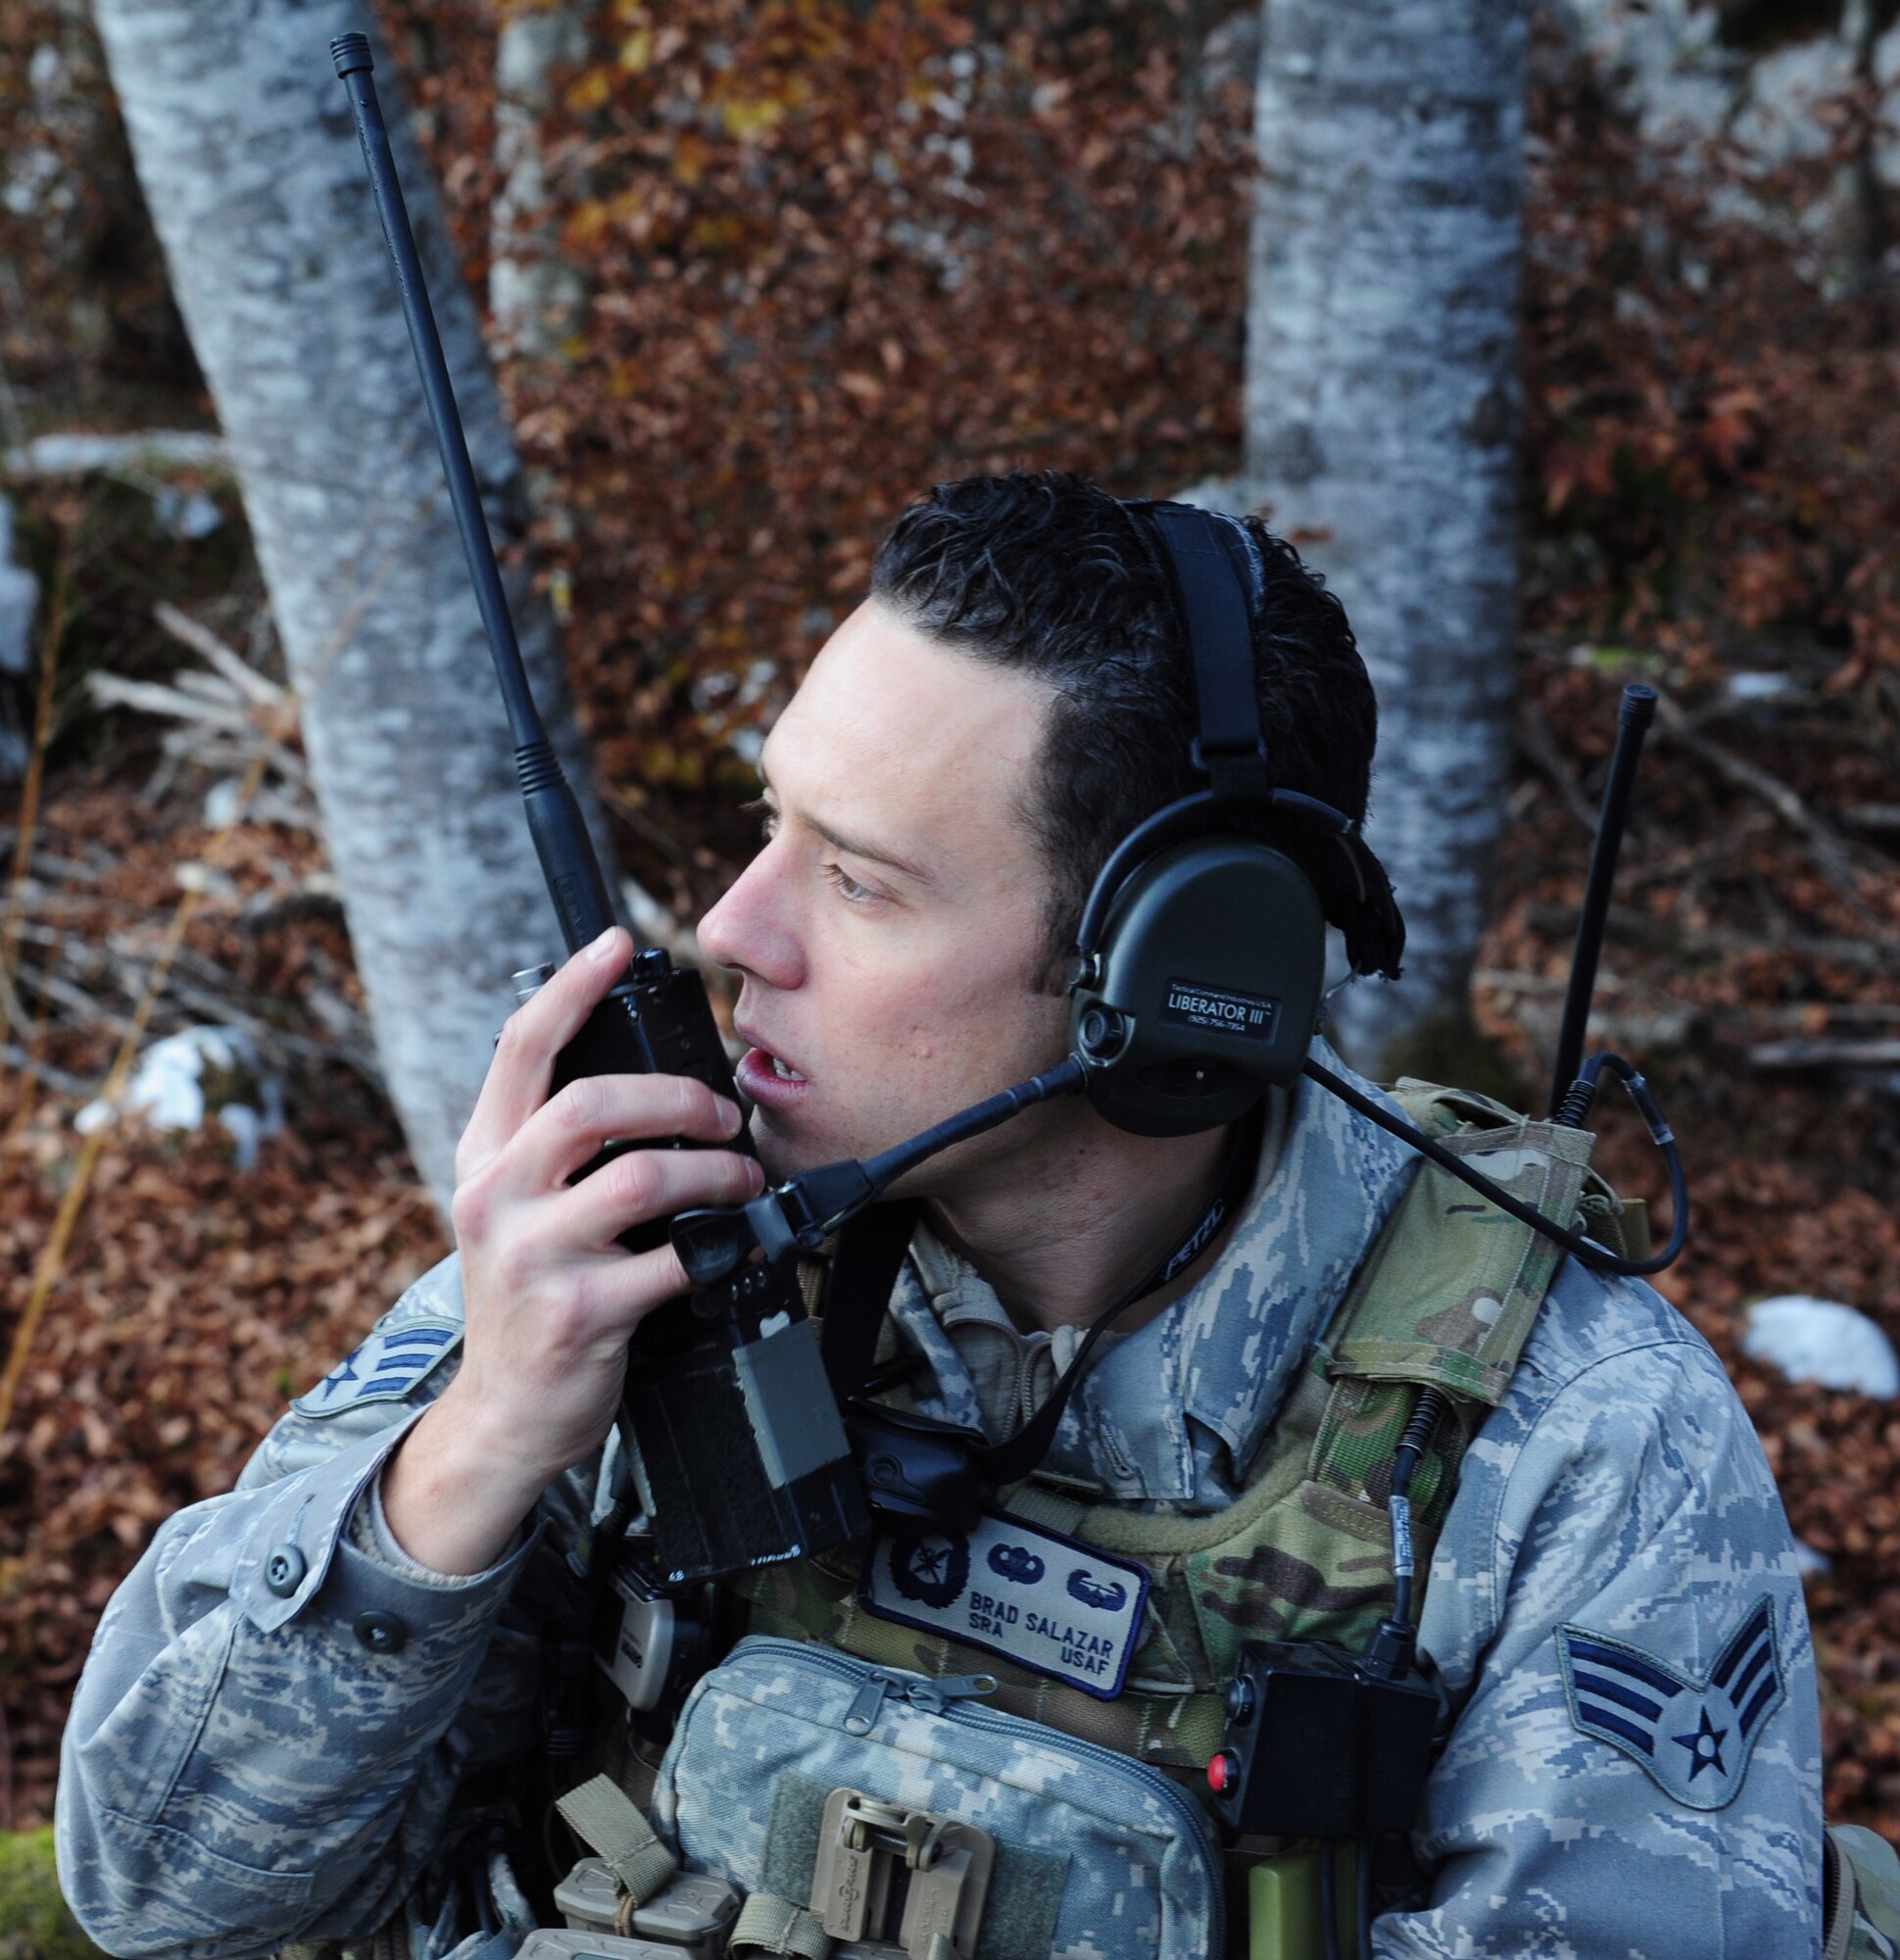 Senior Airman Brad Salazar, 8th Air Support Operations Squadron air control party operator, calls in a simulated air strike Nov. 15 at Barcis, Italy. This training is to help refine techniques and procedures of tactical command and control of air power assets. (U.S. Air Force photo/Airman 1st Class Briana Jones)

